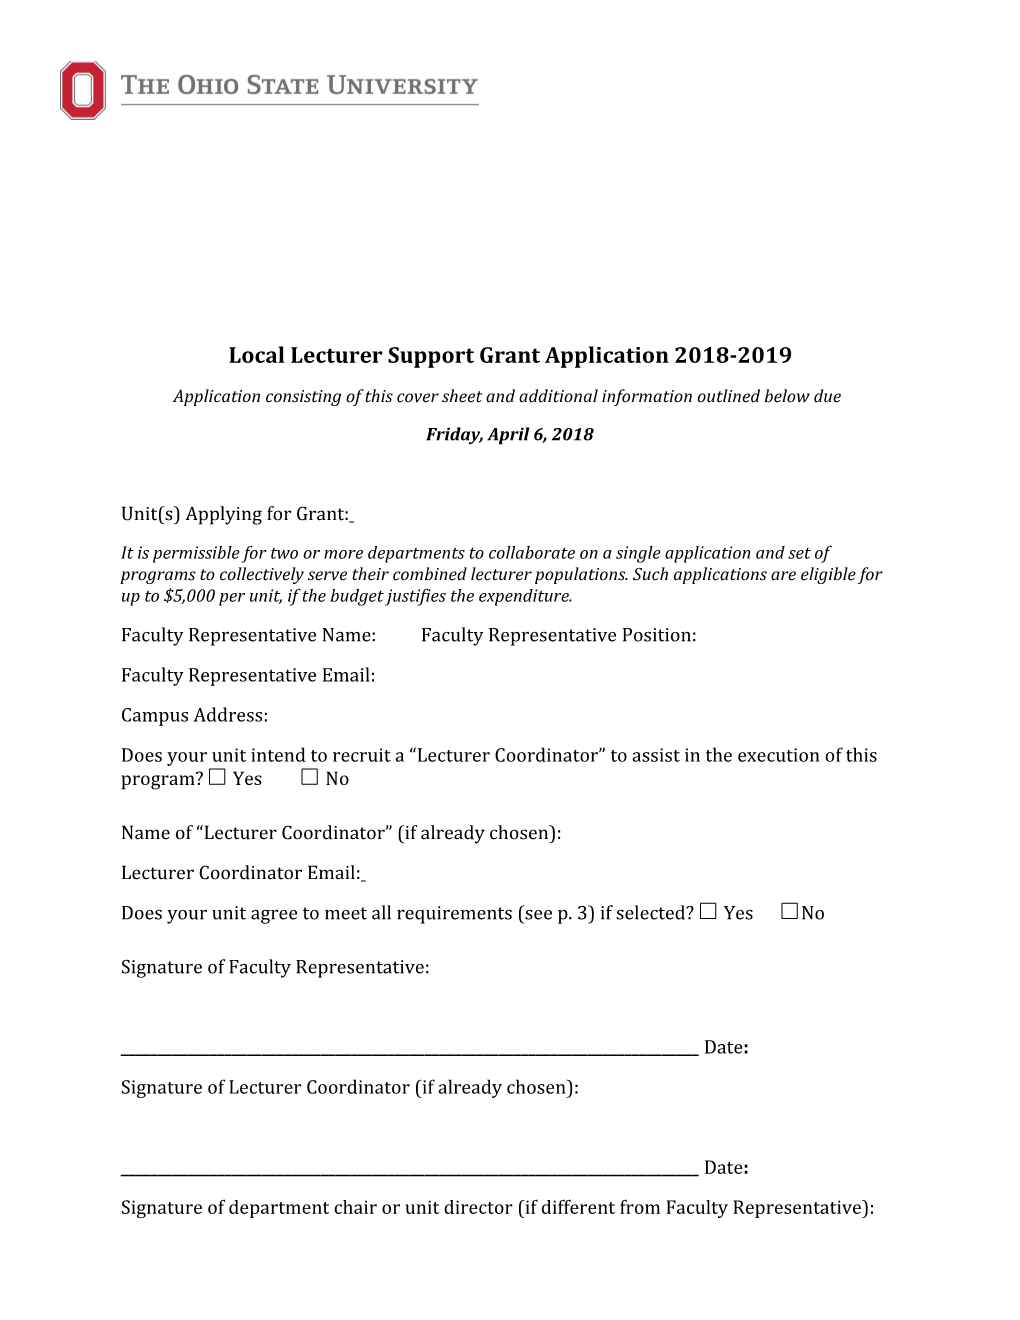 Local Lecturer Support Grant Application2018-2019